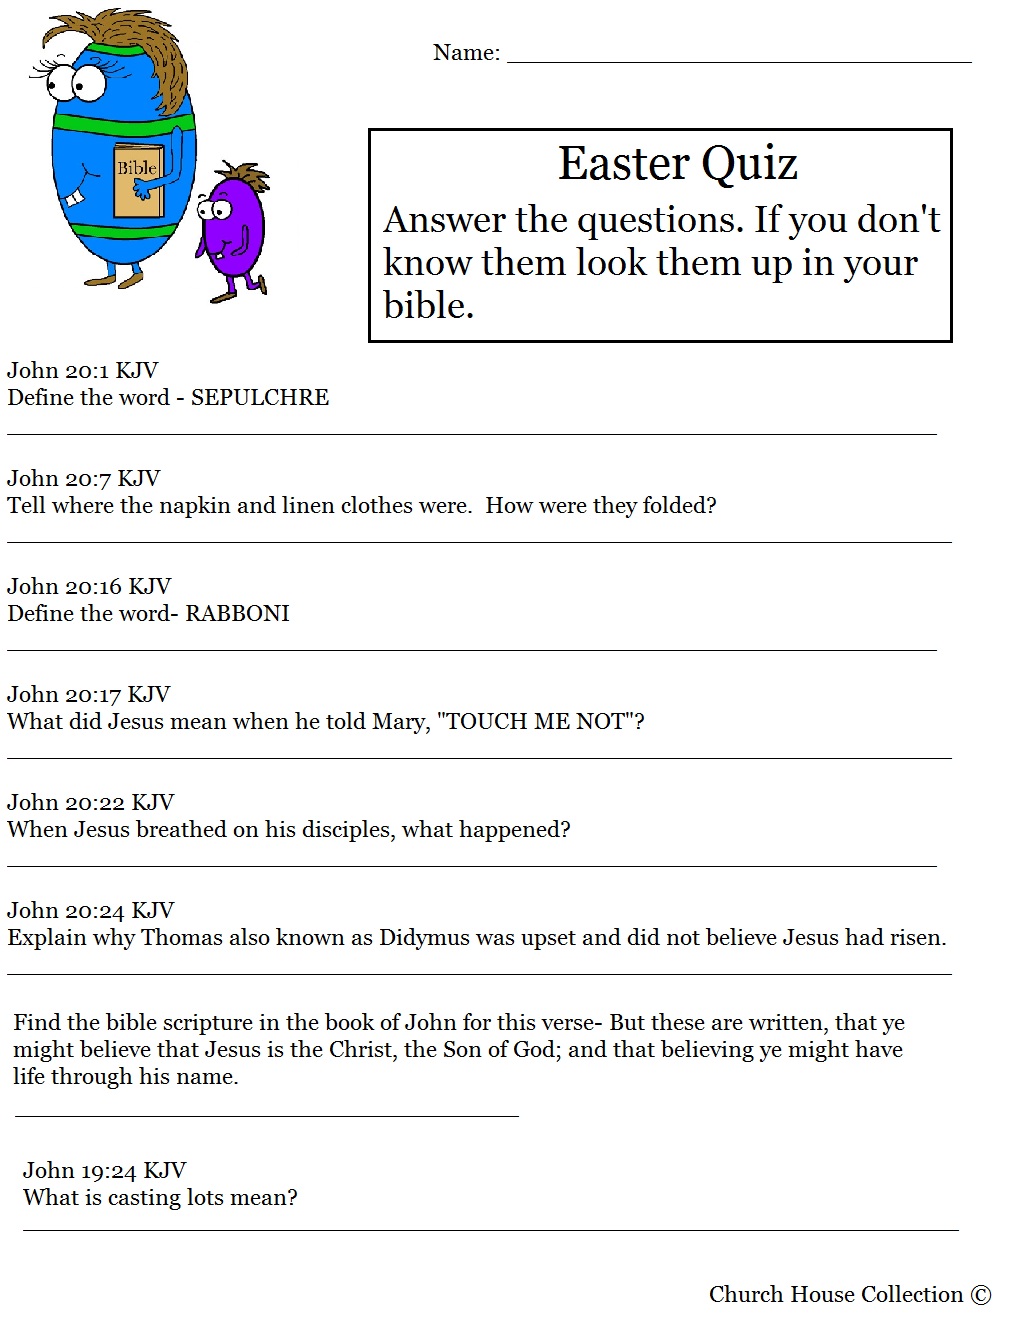 Church House Collection Blog Hard Easter Quiz on